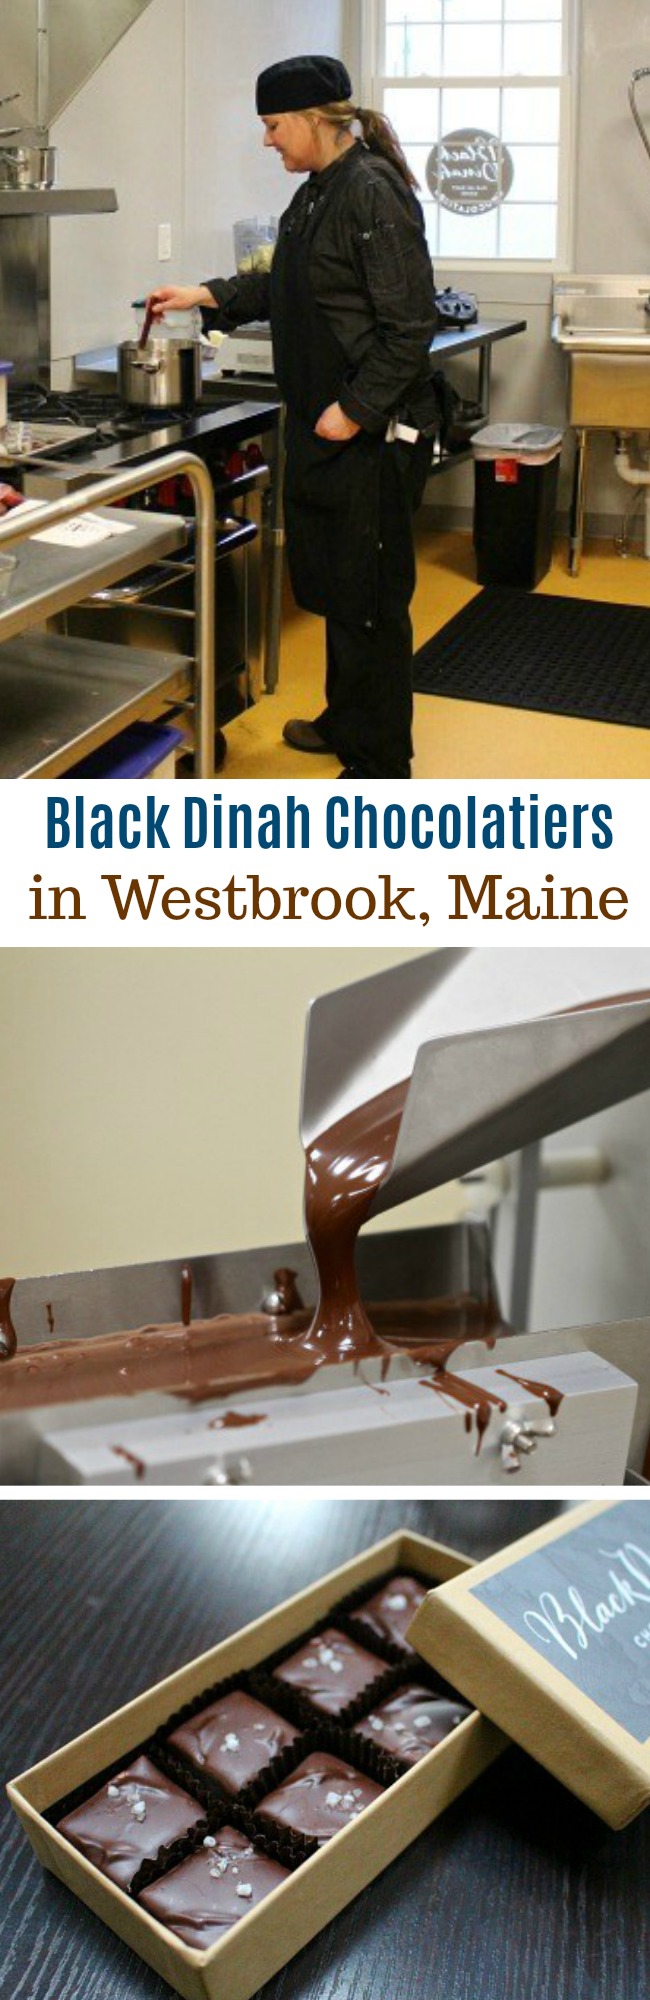 Our Visit to Black Dinah Chocolatiers in Westbrook, Maine